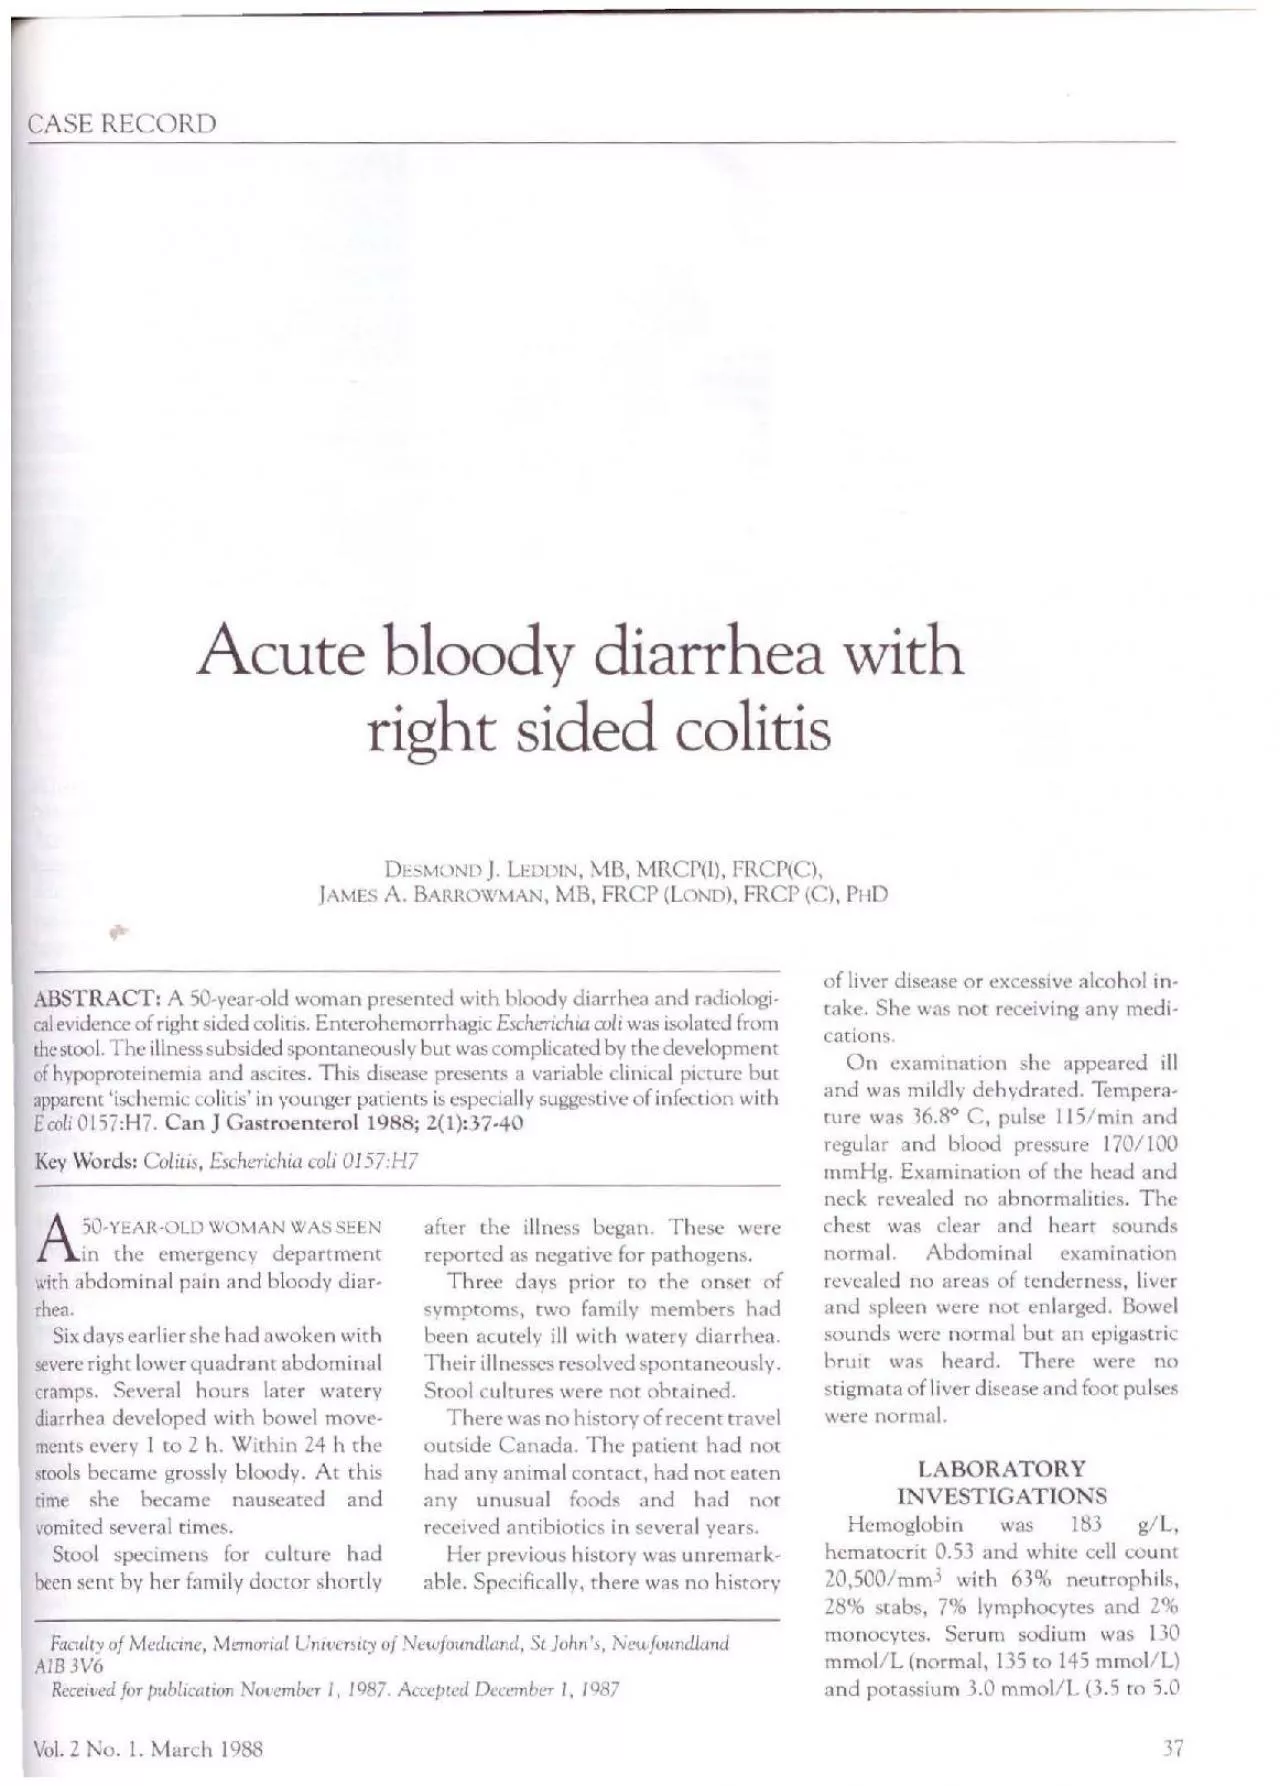 CASE RECORD Acute bloody diarrhea with right sided colitis